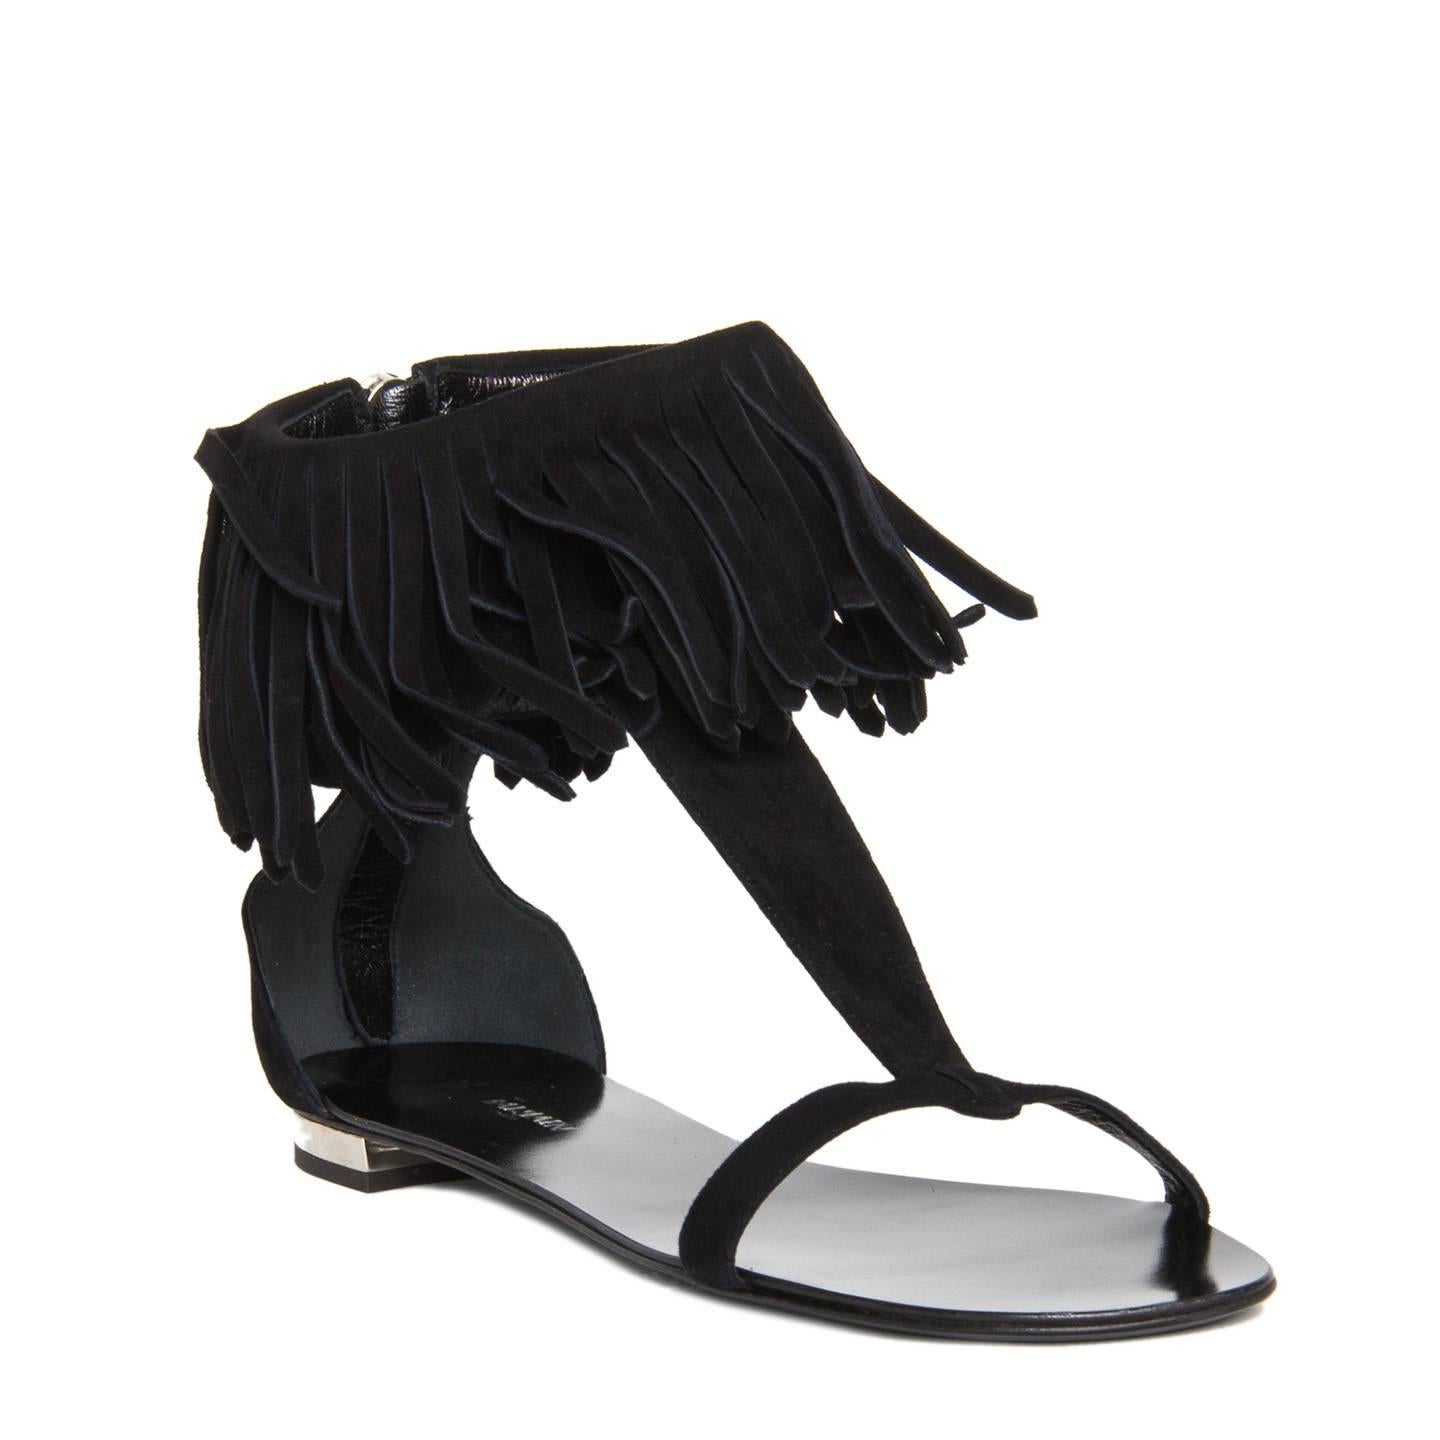 Giuseppe Zanotti for Balmain black suede sandals with open front, back silver chunky zip and cuff with fringes at ankle. Vero cuoio. Made in Italy. Heels 0.5